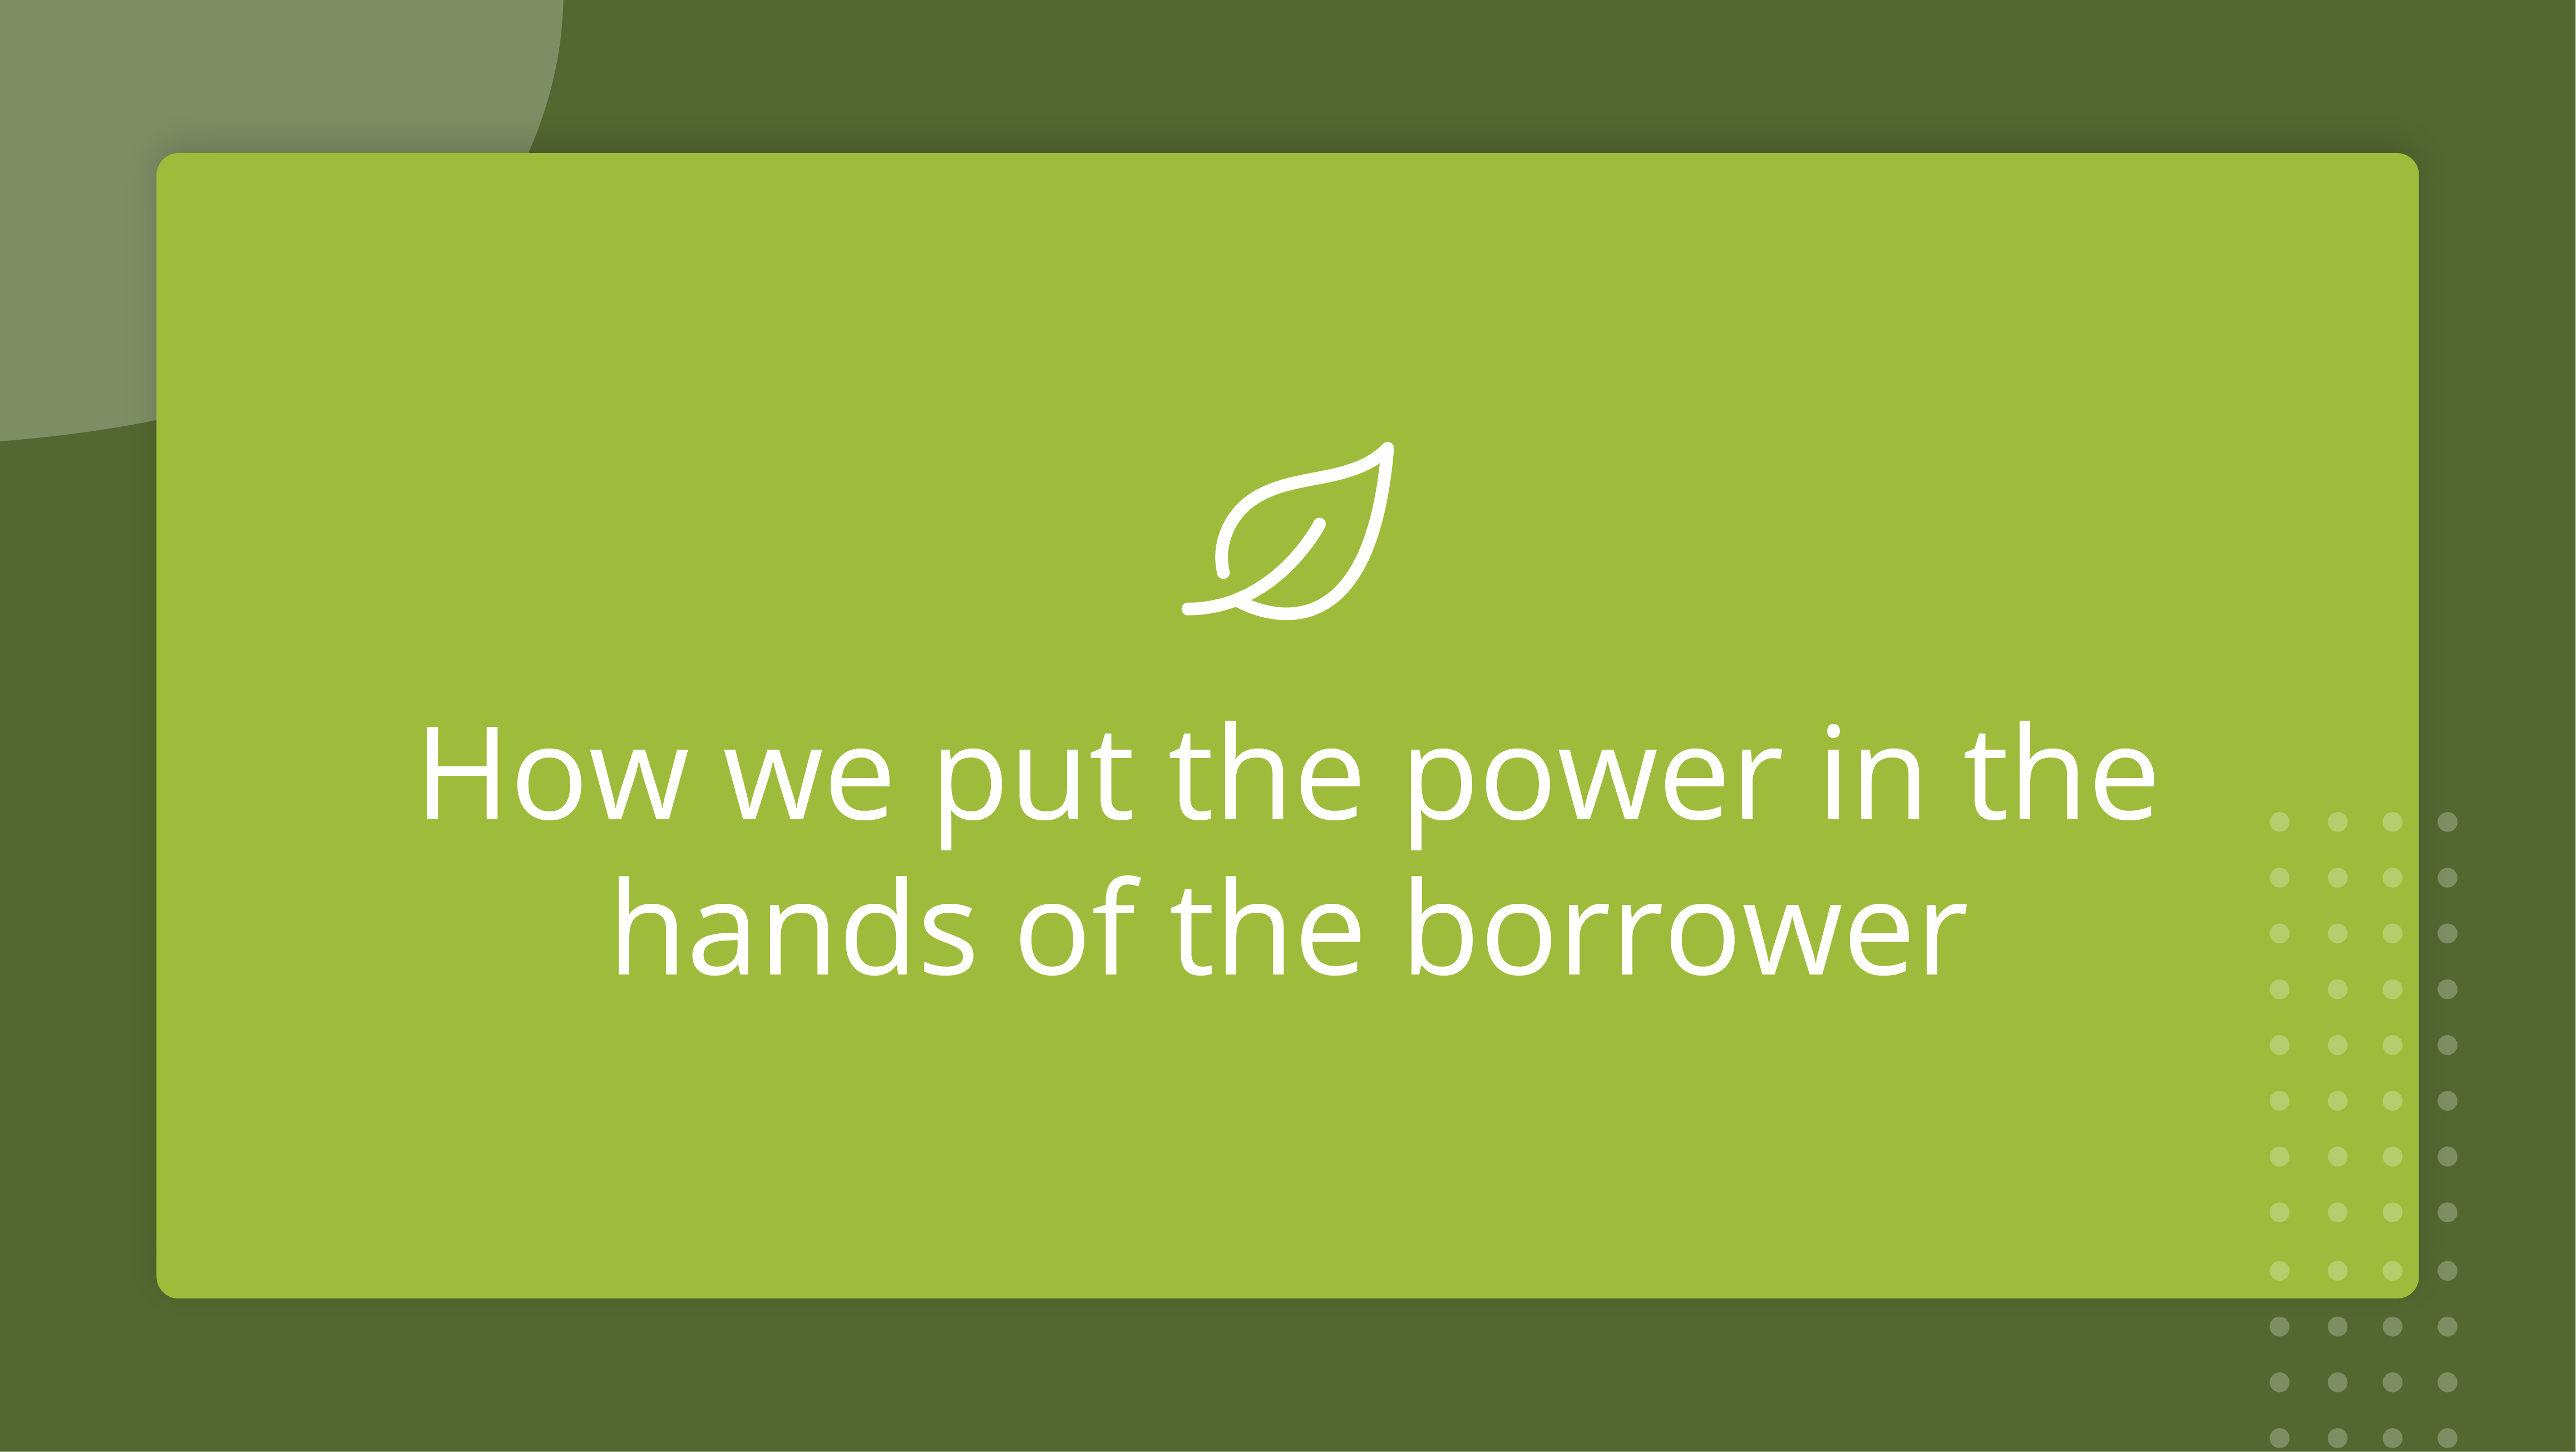 How we put the power in the hands of the borrower